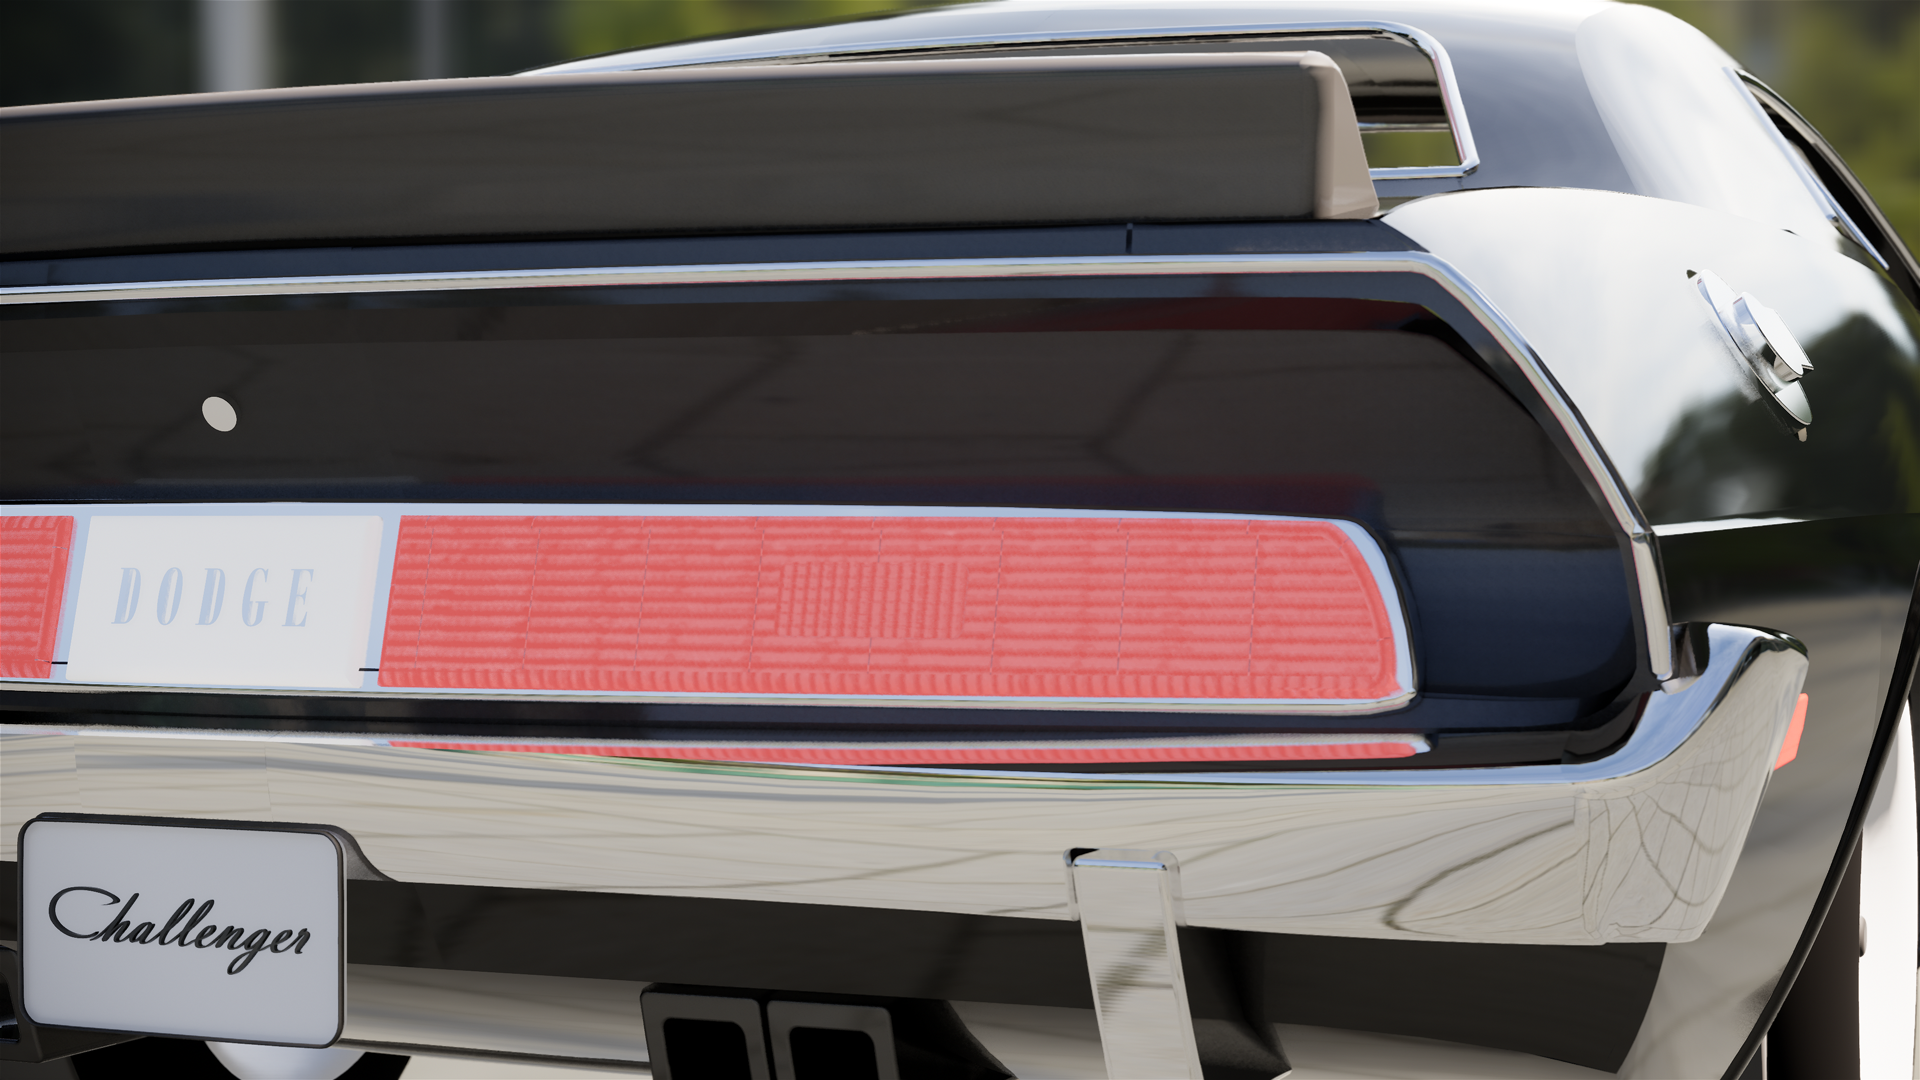 Material with Bump and Self-Illuminance Applied to Taillights